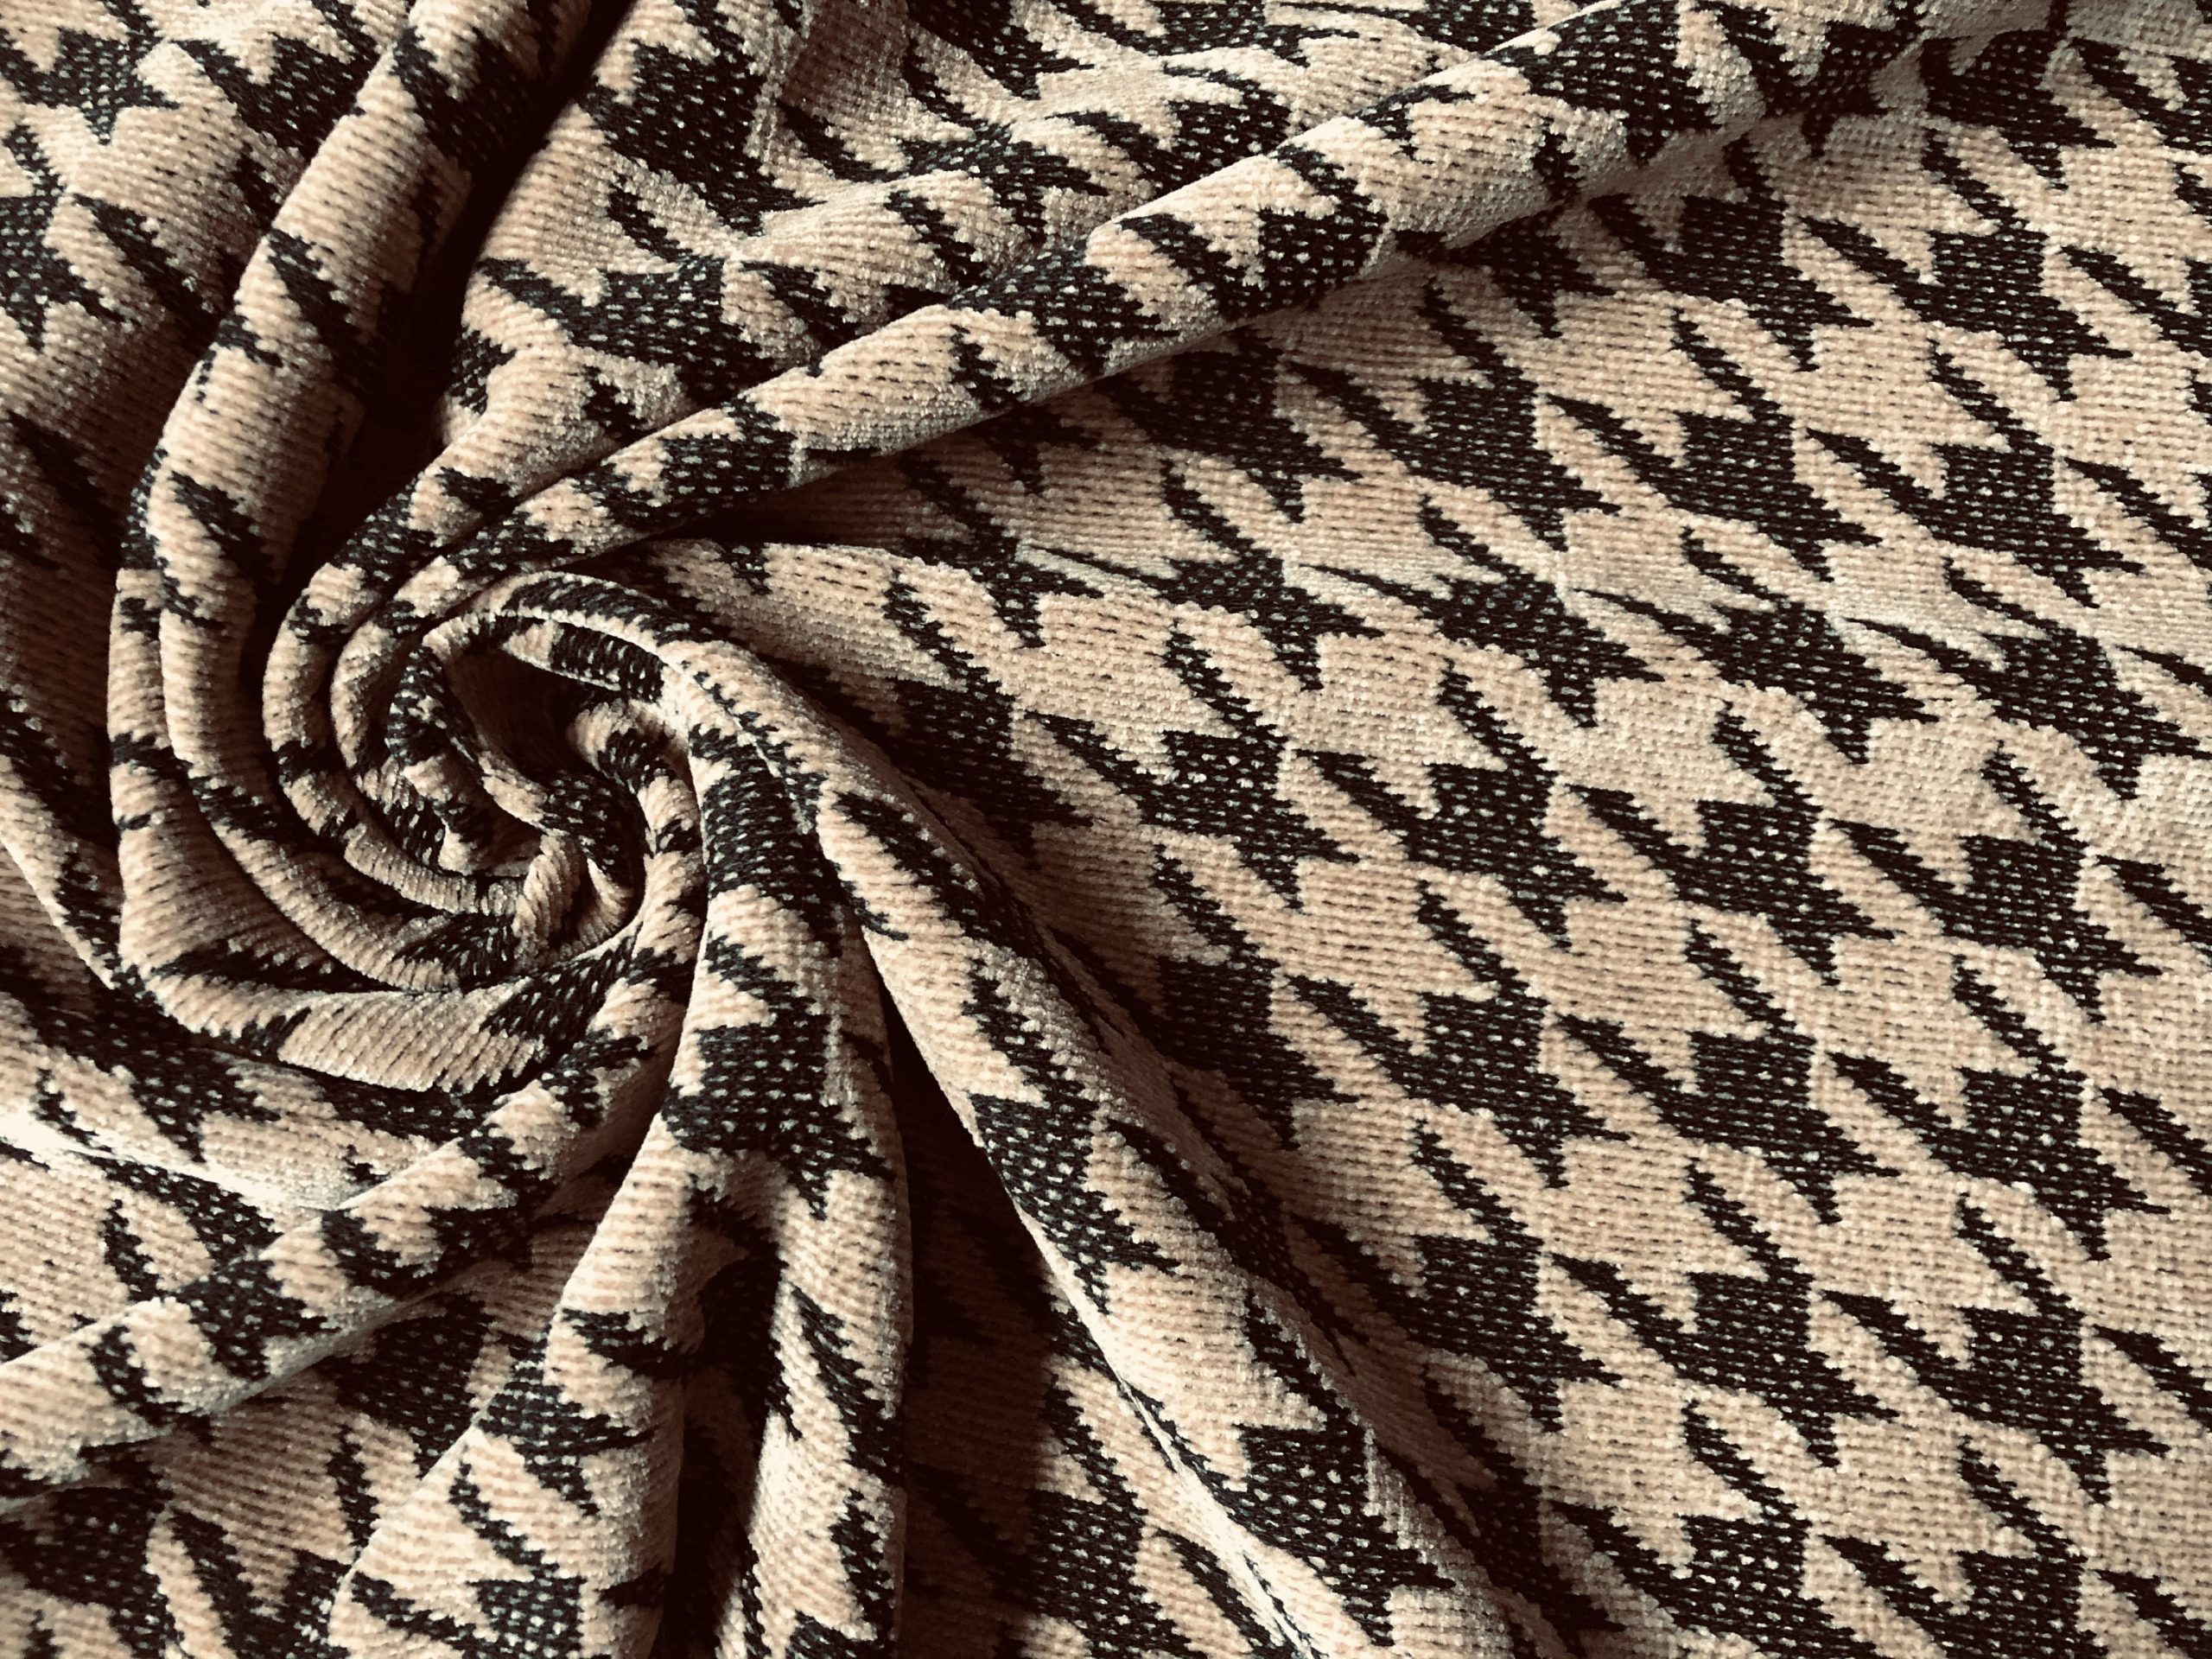 https://lushfabric.com/wp-content/uploads/2021/01/taupe-houndstooth-chenille-fabric-jacquard-gobelin-material-upholstery-soft-cloth-2-way-stretch-59-150cm-wide-6001b0a1-scaled.jpg